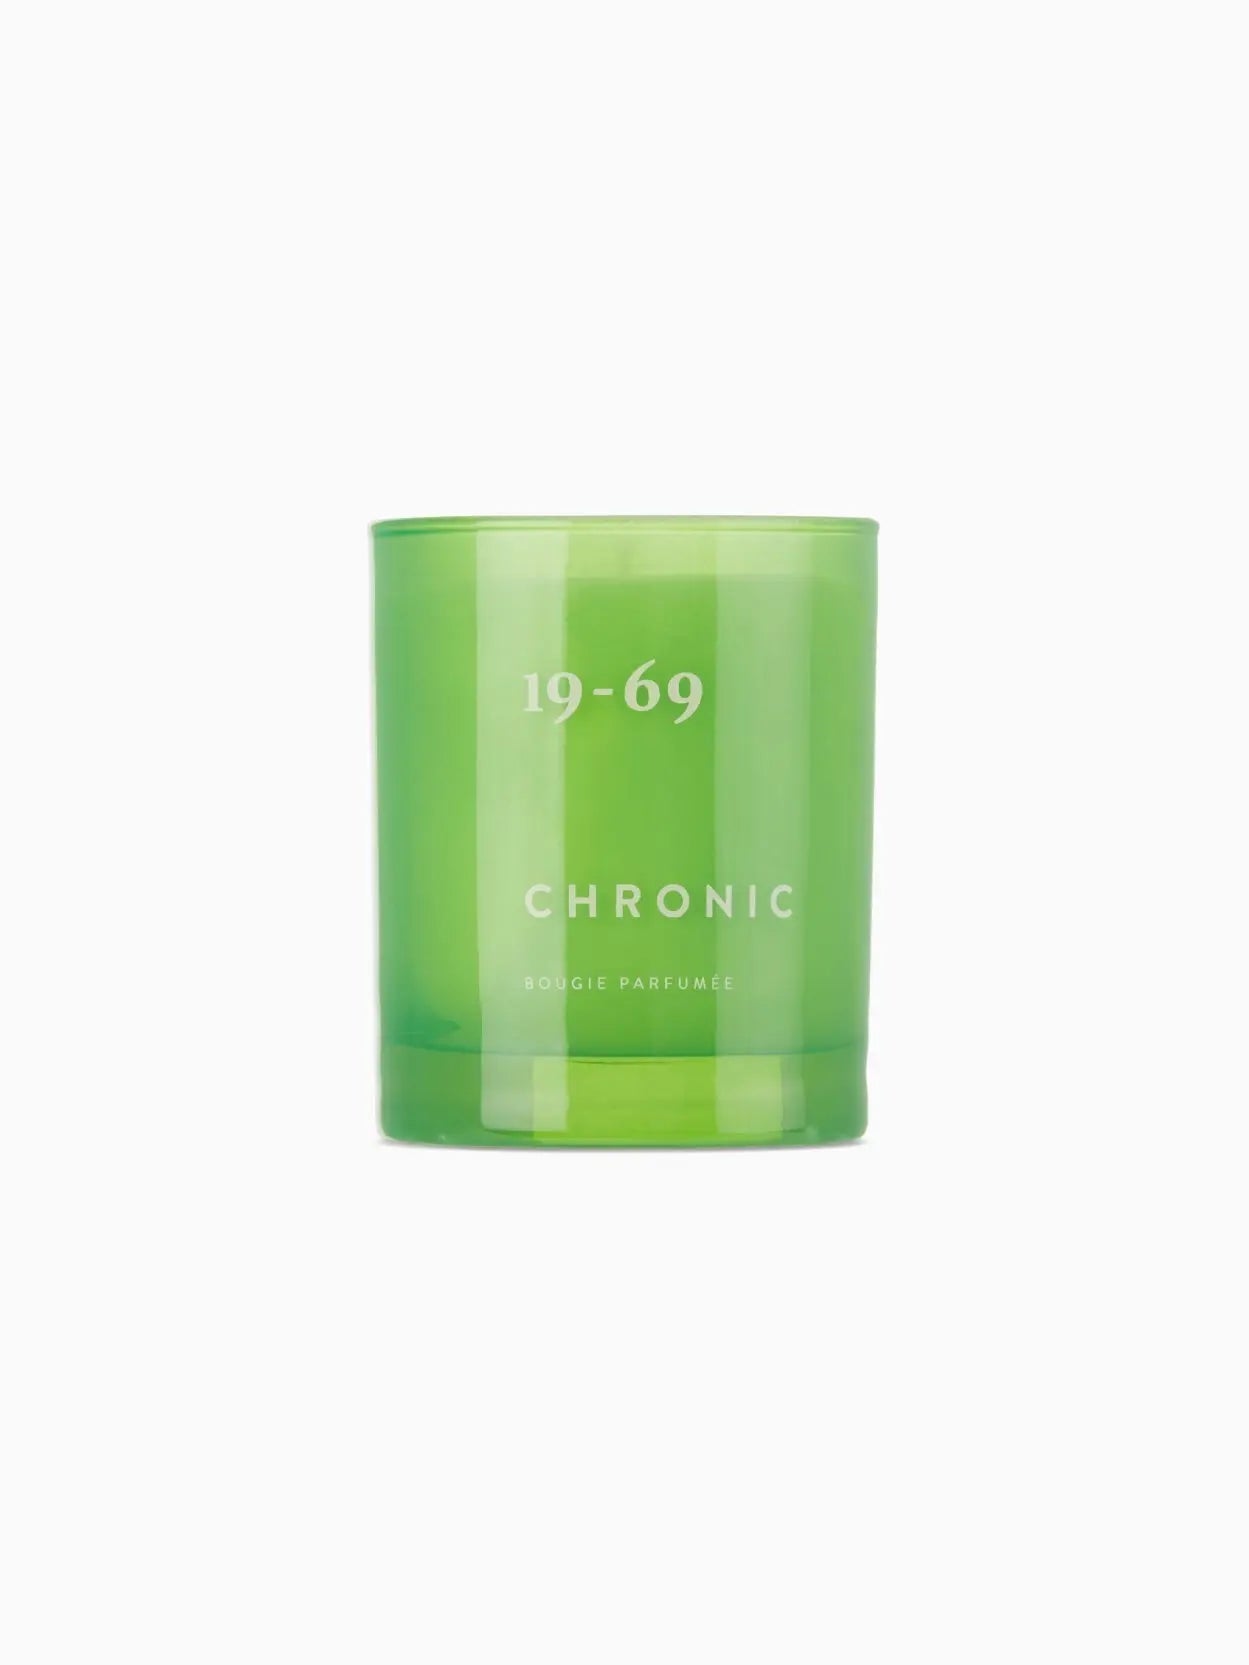 A Chronic Candle 200ml in a glass container with "19-69" written in white text at the top and "CHRONIC" along with "BOUGIE PARFUMÉE" in smaller text below it, available at Bassalstore, Barcelona. The background is plain white.